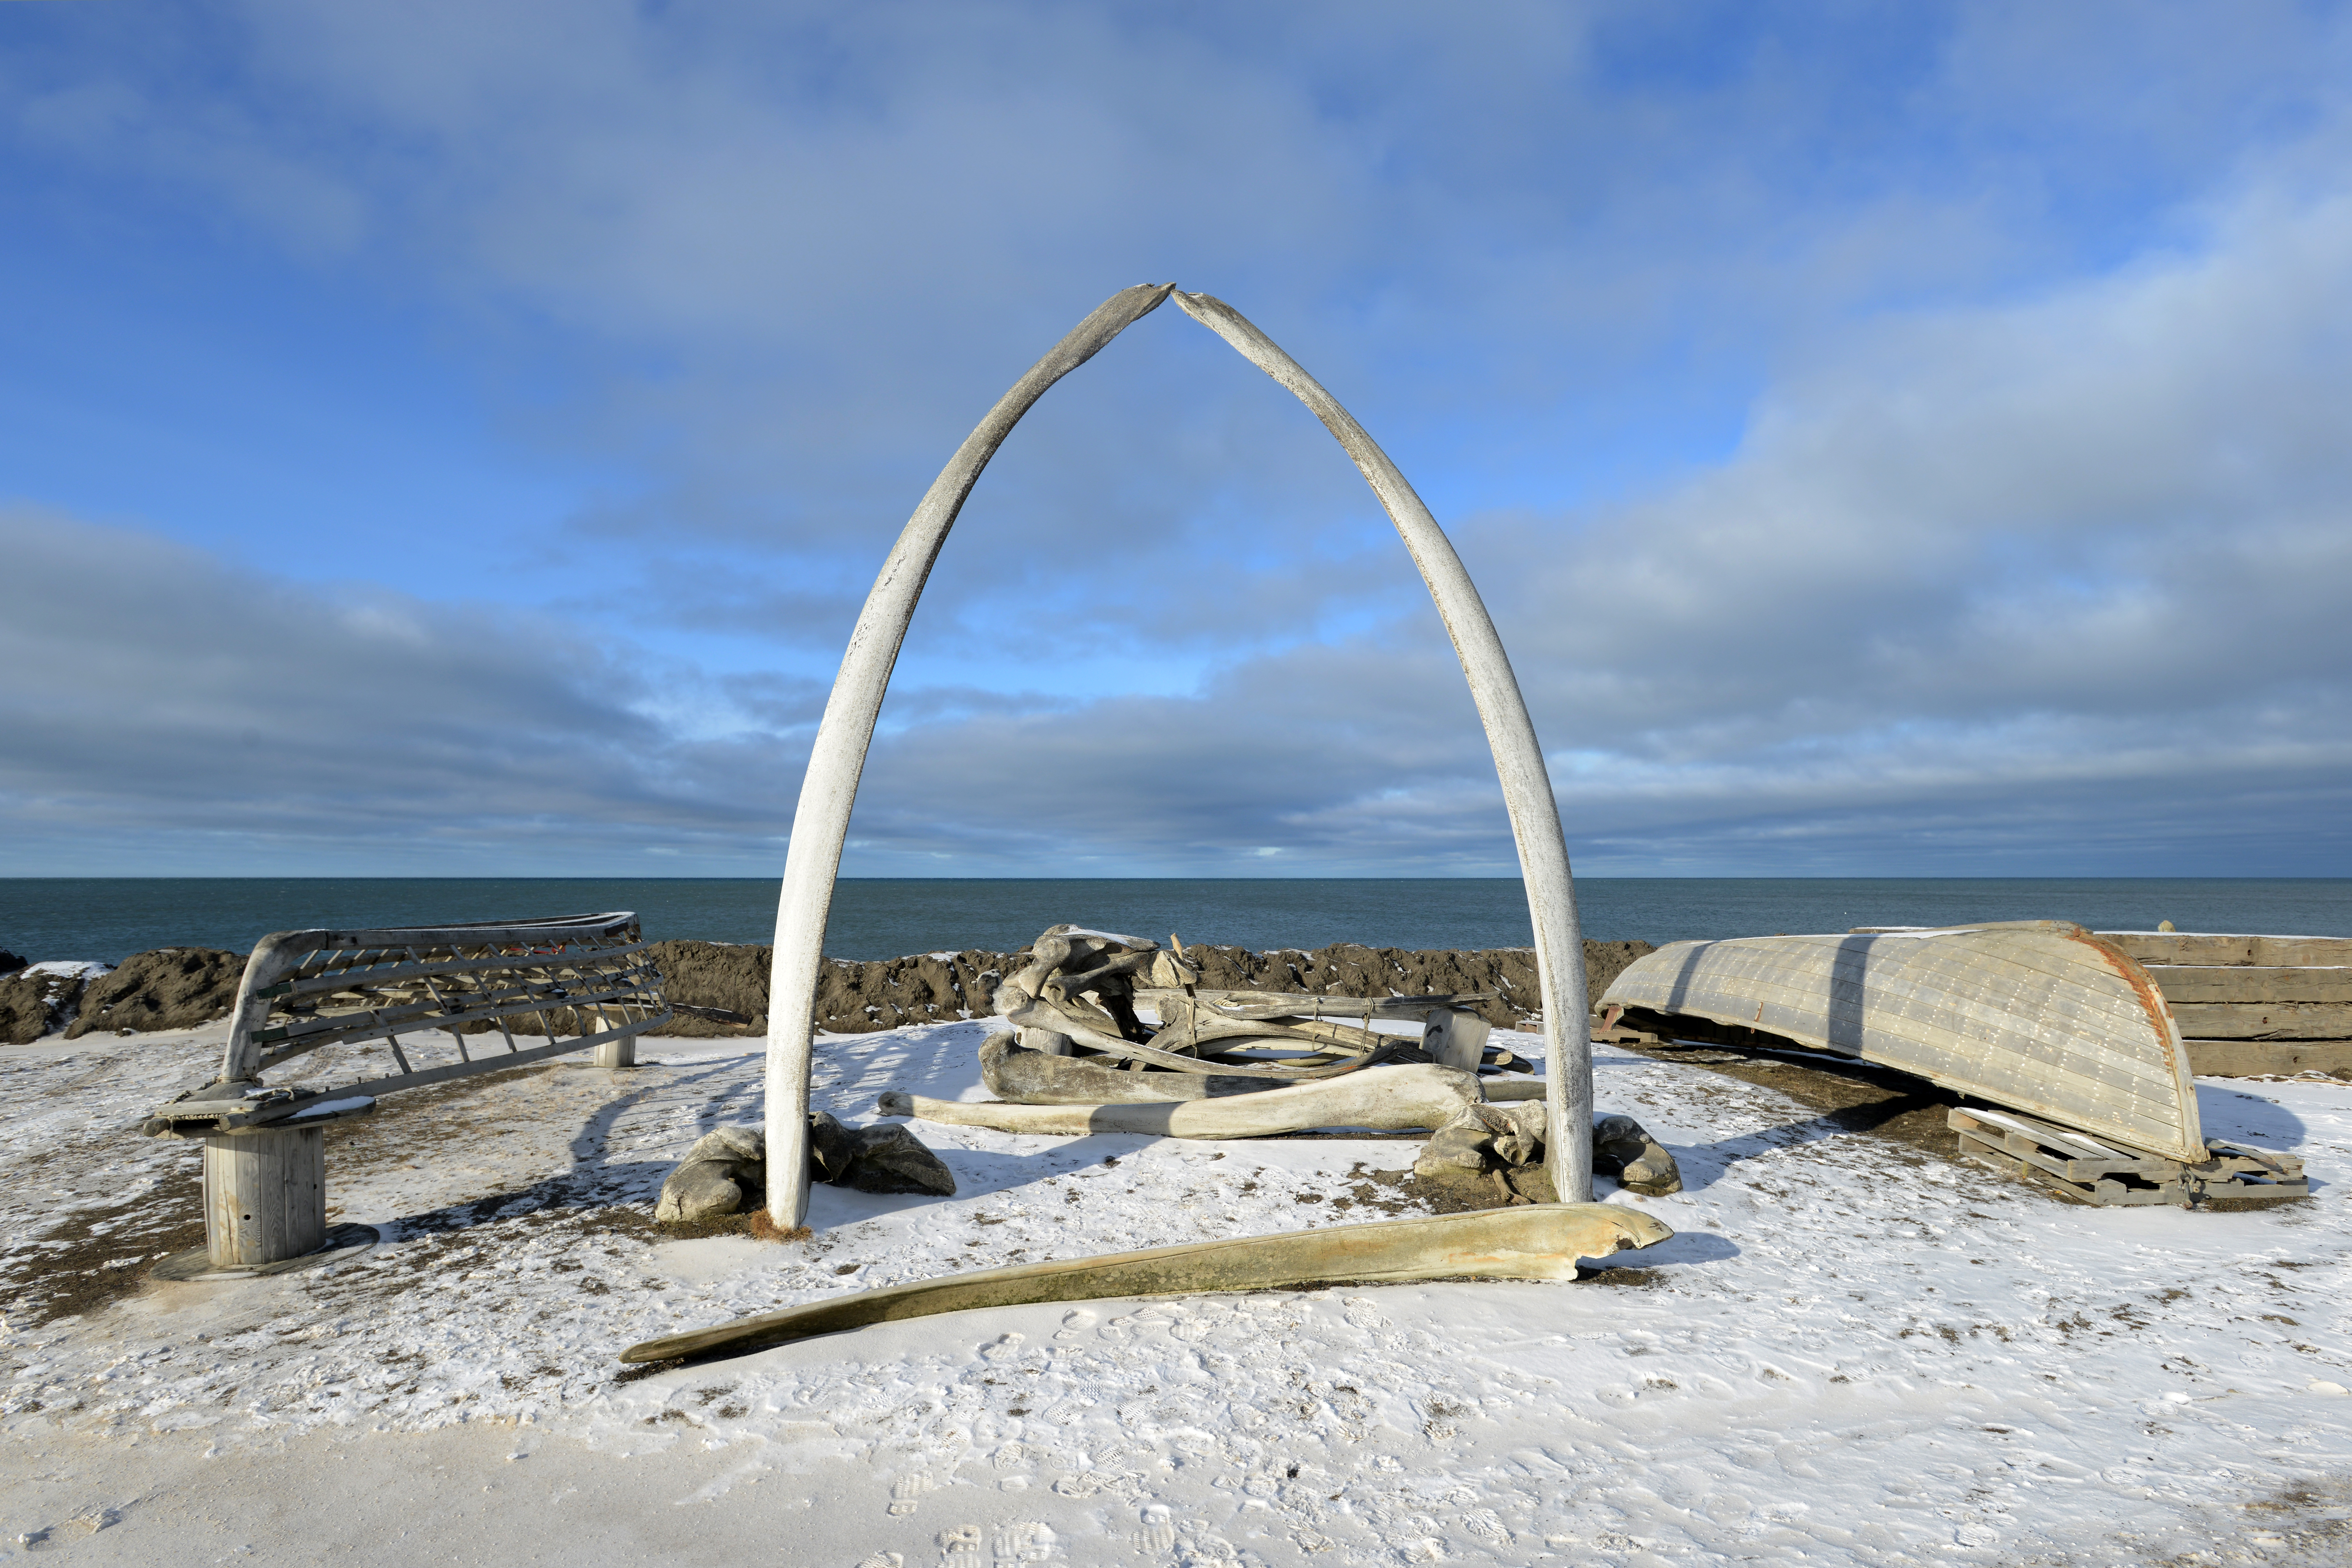 The iconic whale bone arch is photographed on Wednesday, September 23, 2015, in Barrow, which will officially be renamed Utqiaġvik on Dec. 1, 2016. (Erik Hill / Alaska Dispatch News)